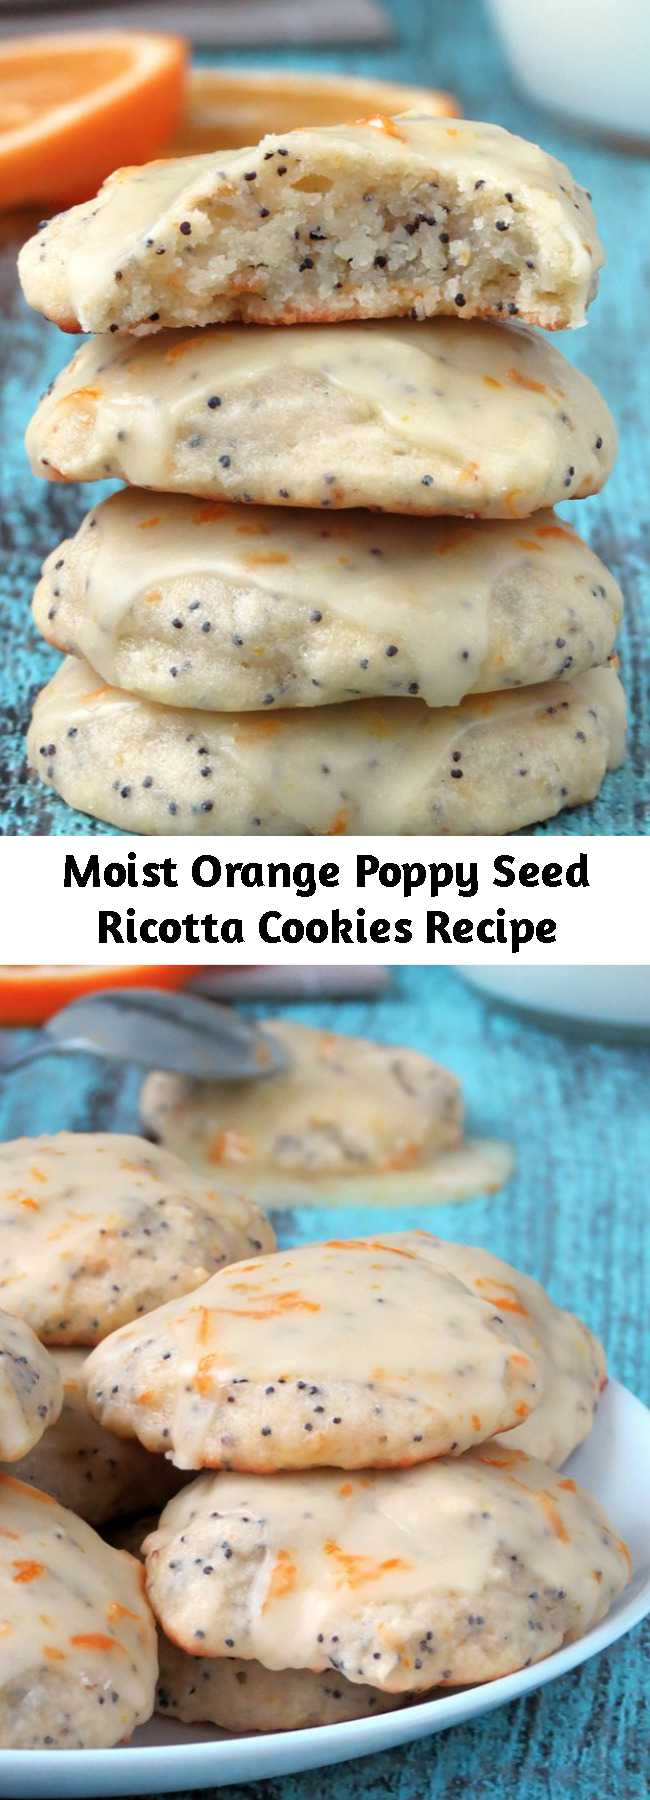 Moist Orange Poppy Seed Ricotta Cookies Recipe - If you have never tried ricotta in cookies, then this is a good recipe to start with. They’re different than other cookies, trust me. These little guys are so moist and light and I love how the ricotta cheese gives them a bit more richness and changes the texture to be more cake-like. These melt in your mouth goodies are bursting with orange flavor which pairs perfectly with hints of cardamom. The poppy seeds add a lovely crunch, which I adore.